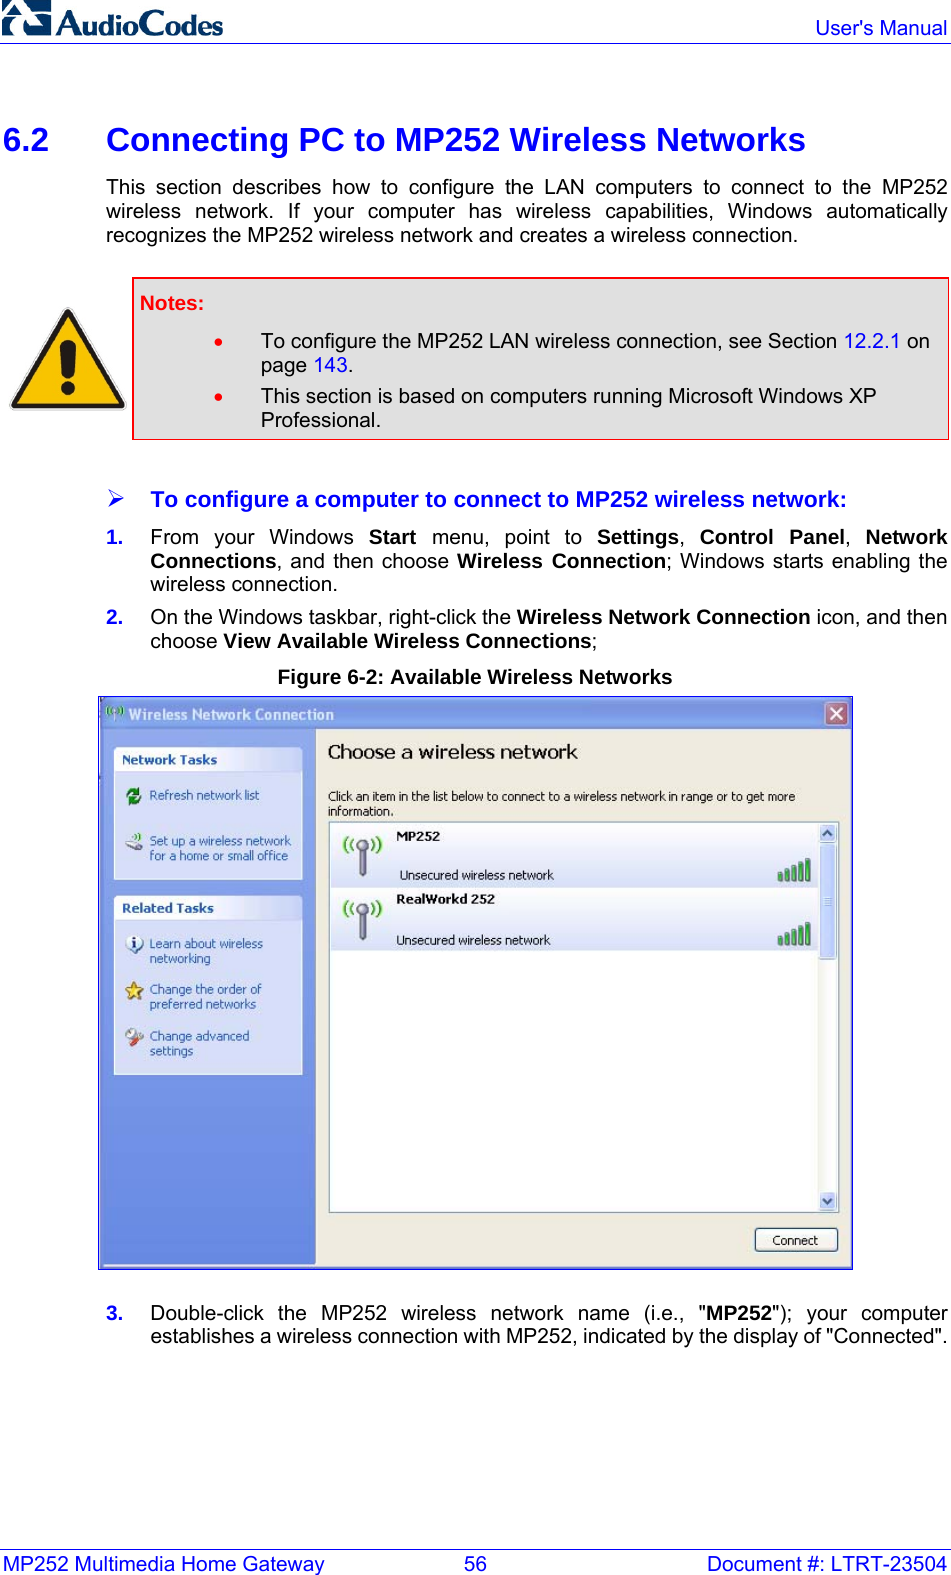 MP252 Multimedia Home Gateway  56  Document #: LTRT-23504  User&apos;s Manual  6.2  Connecting PC to MP252 Wireless Networks This section describes how to configure the LAN computers to connect to the MP252 wireless network. If your computer has wireless capabilities, Windows automatically recognizes the MP252 wireless network and creates a wireless connection.    Notes:  • To configure the MP252 LAN wireless connection, see Section 12.2.1 on page 143. • This section is based on computers running Microsoft Windows XP Professional.  ¾ To configure a computer to connect to MP252 wireless network: 1.  From your Windows Start  menu, point to Settings,  Control Panel,  Network Connections, and then choose Wireless Connection; Windows starts enabling the wireless connection. 2.  On the Windows taskbar, right-click the Wireless Network Connection icon, and then choose View Available Wireless Connections; Figure 6-2: Available Wireless Networks  3.  Double-click the MP252 wireless network name (i.e., &quot;MP252&quot;); your computer establishes a wireless connection with MP252, indicated by the display of &quot;Connected&quot;.    